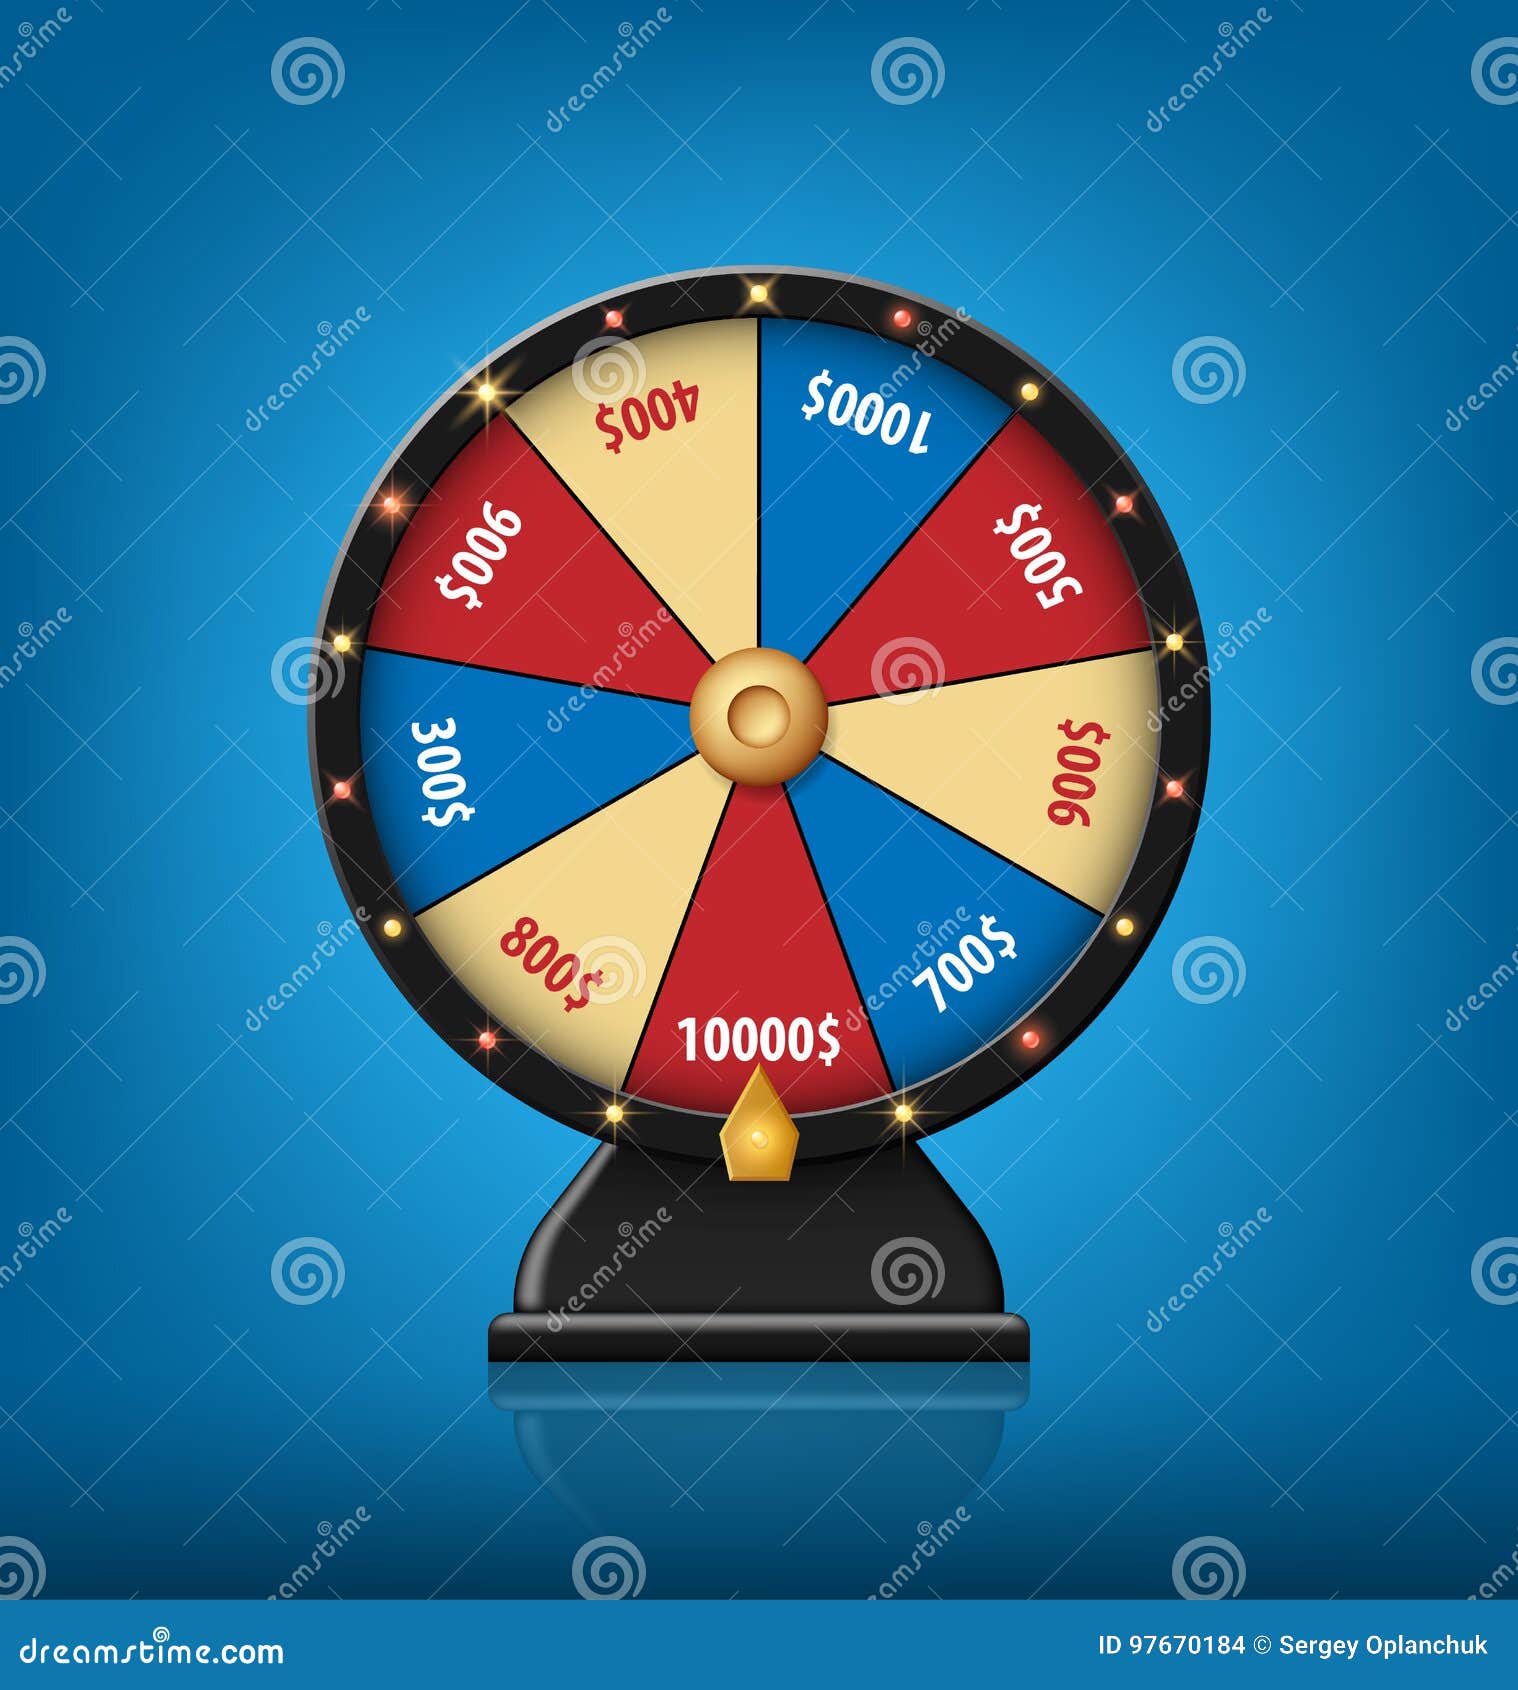 color lucky wheel template. realistic wheel of fortune  on blue background.  